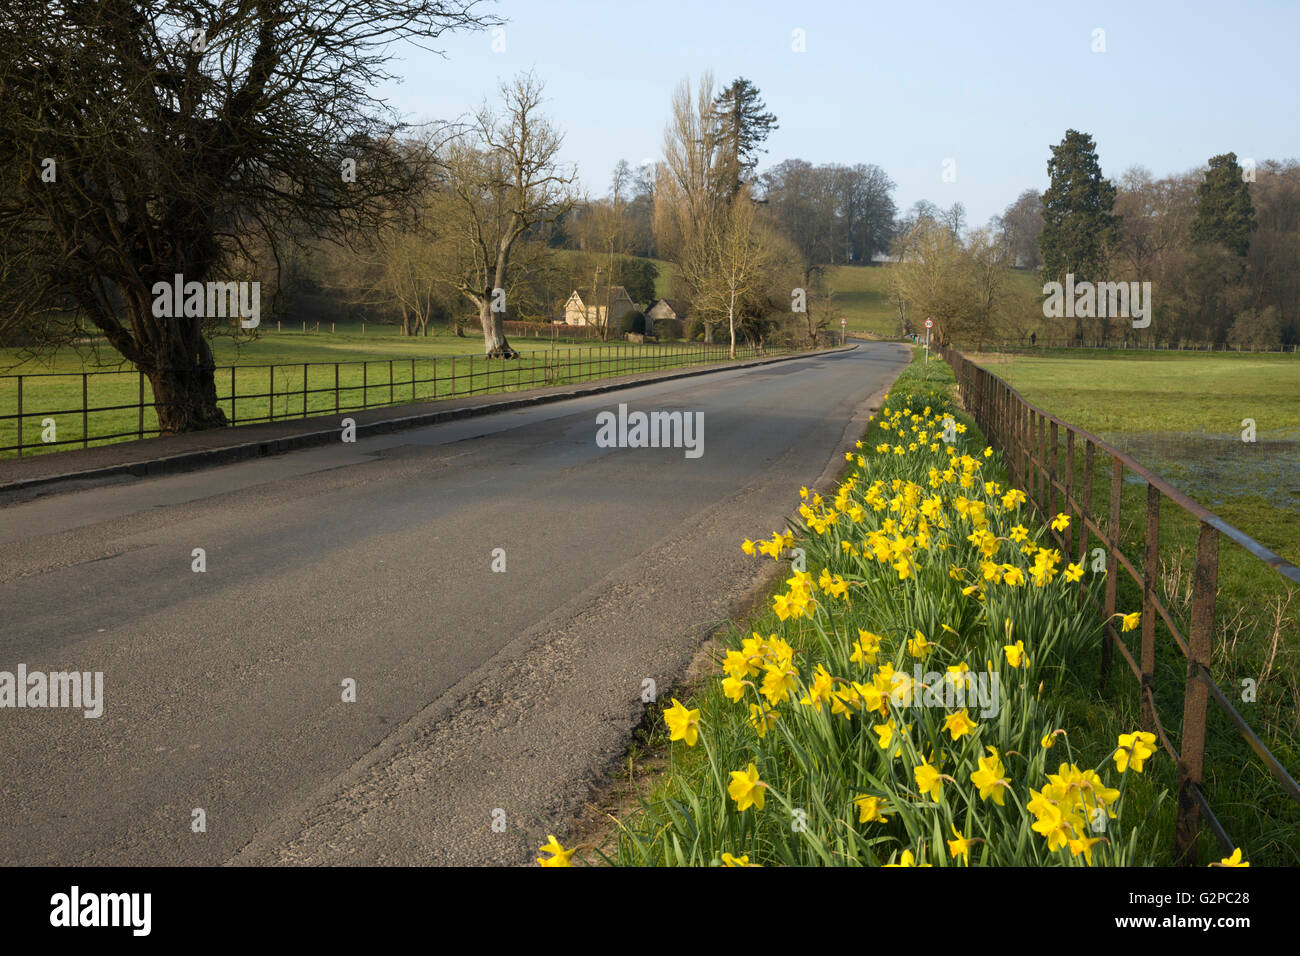 Daffodil lined country road, Coln St Aldwyns, Cotswolds, Gloucestershire, England, United Kingdom, Europe Stock Photo